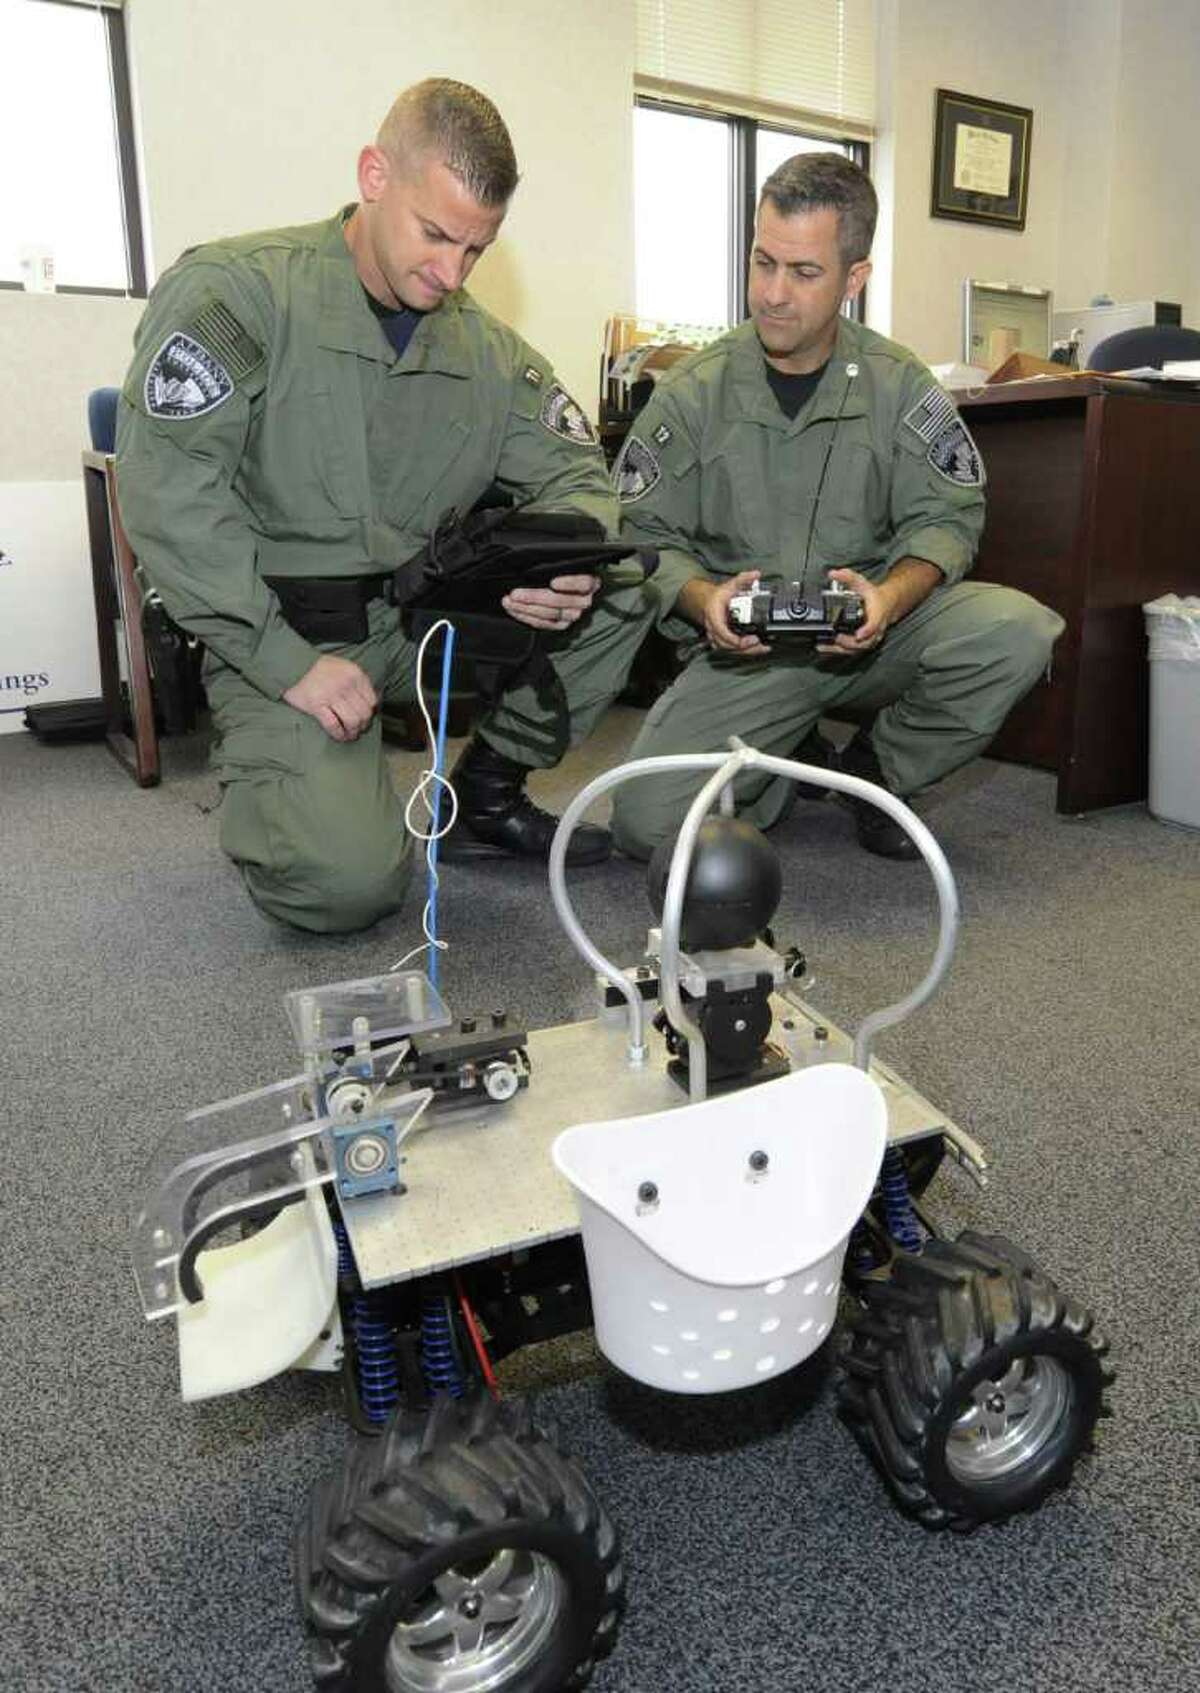 Albany Police Officers Ken Koonz, left and Hayden Butterfield of the Emergency Response Team show off the robotic machine at the Public Safety building in Albany, N.Y. November 17, 2011. The Low Cost Surveillance Unit uses an onboard camera to seek out assailants in a barricade or hostage situation. (Skip Dickstein/Times Union)